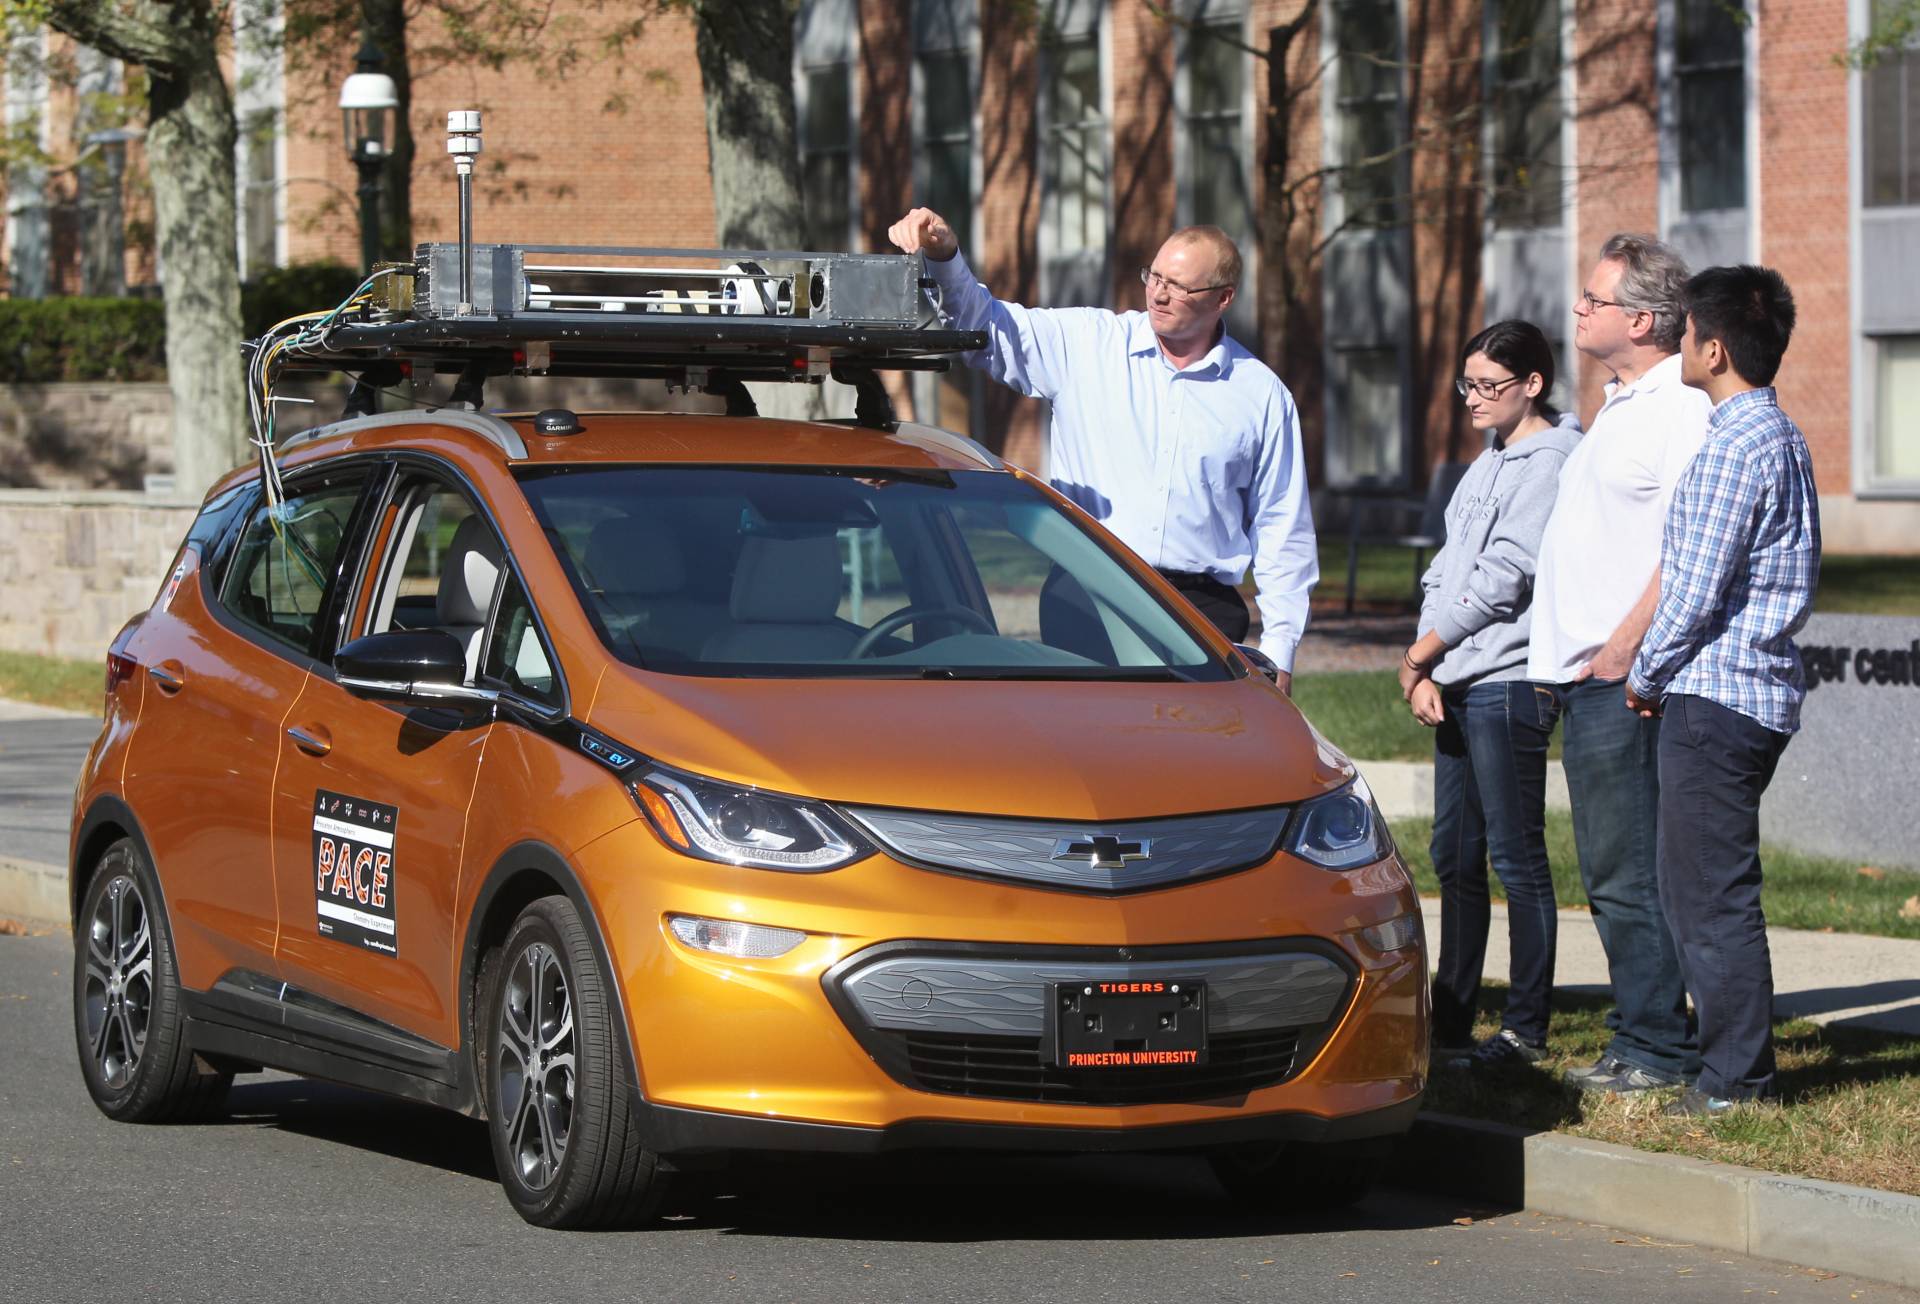 Researchers stand next to electric car